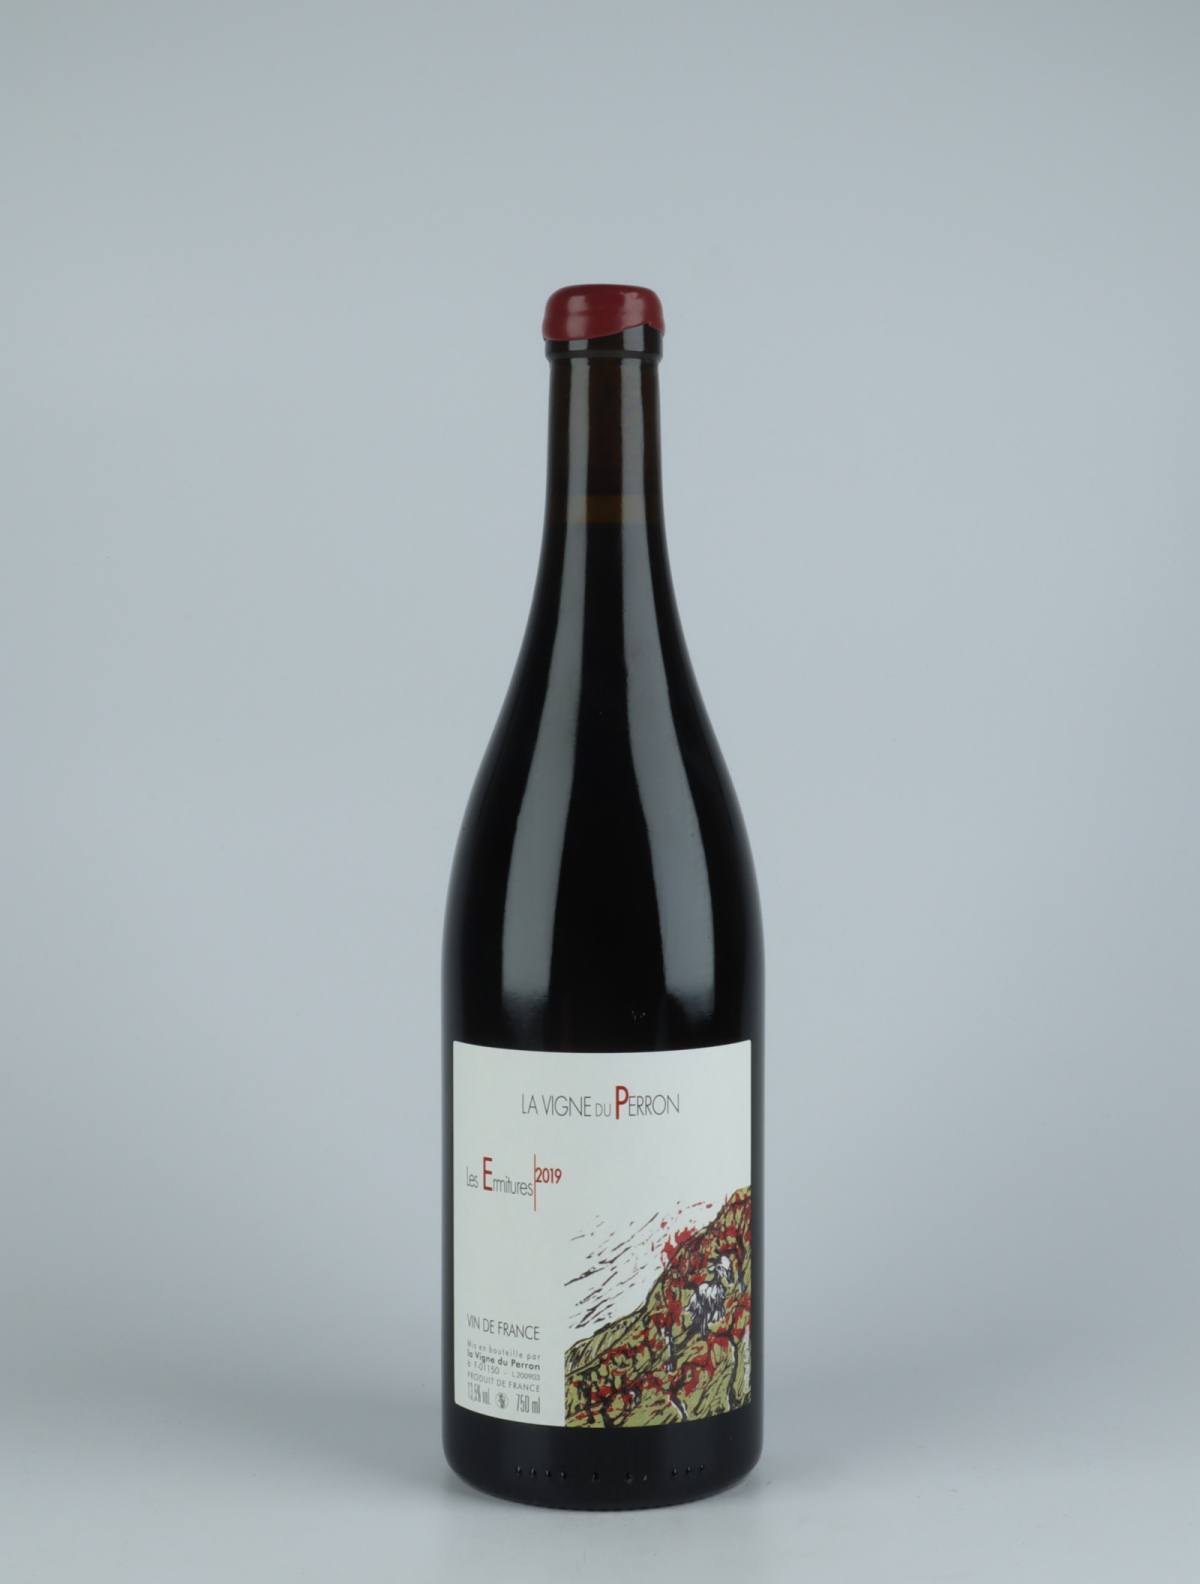 A bottle 2019 Ermitures Red wine from Domaine du Perron, Bugey in France